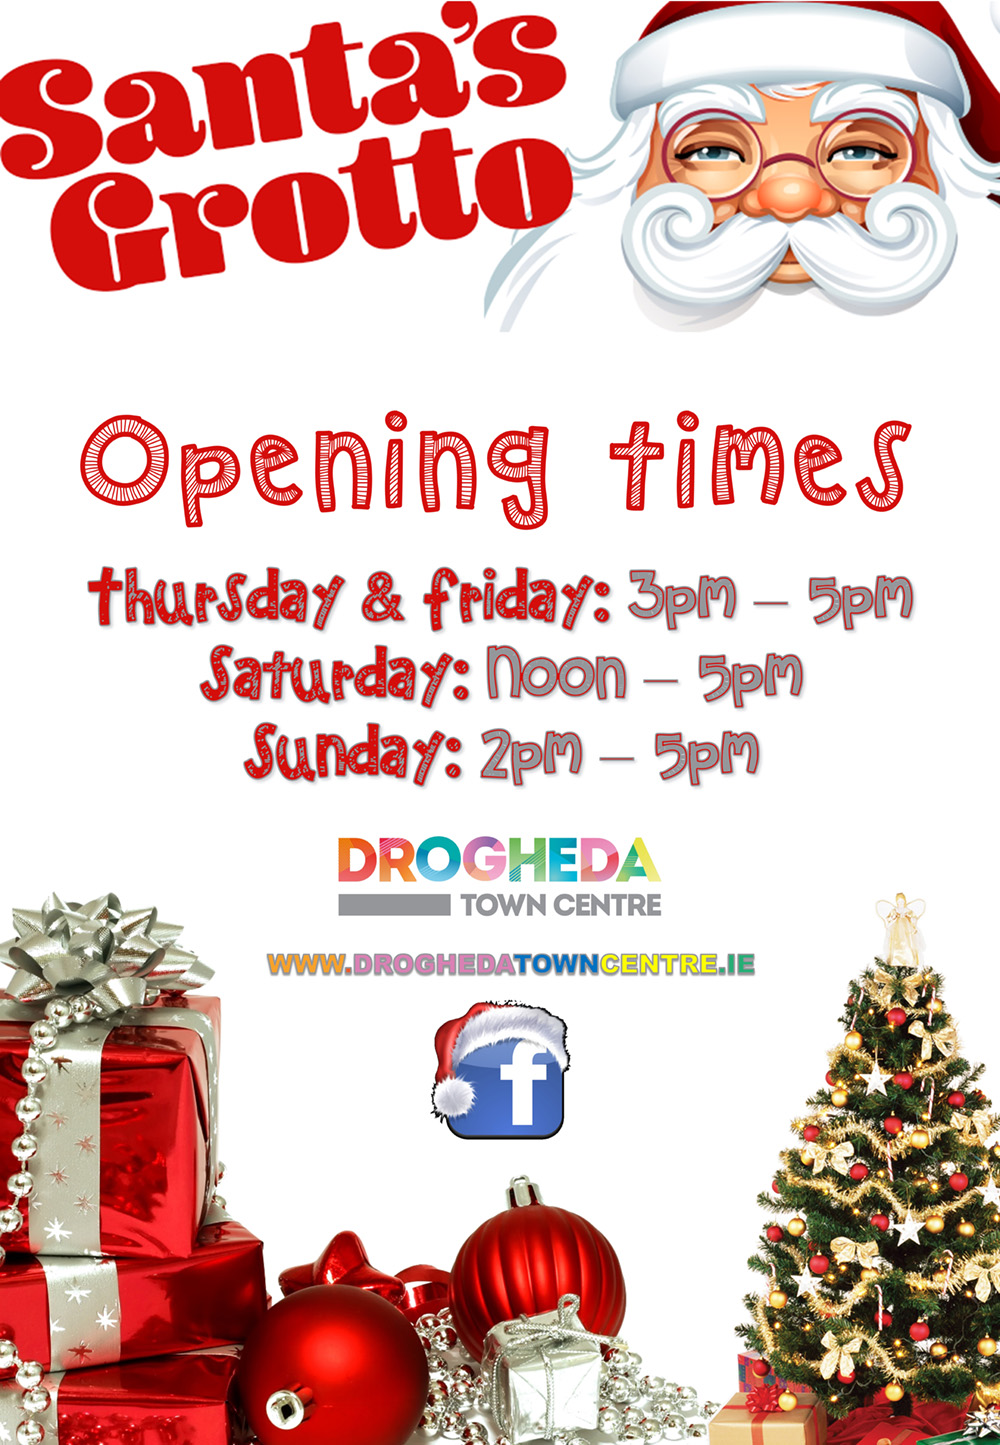 Santa's Grotto Opening Times